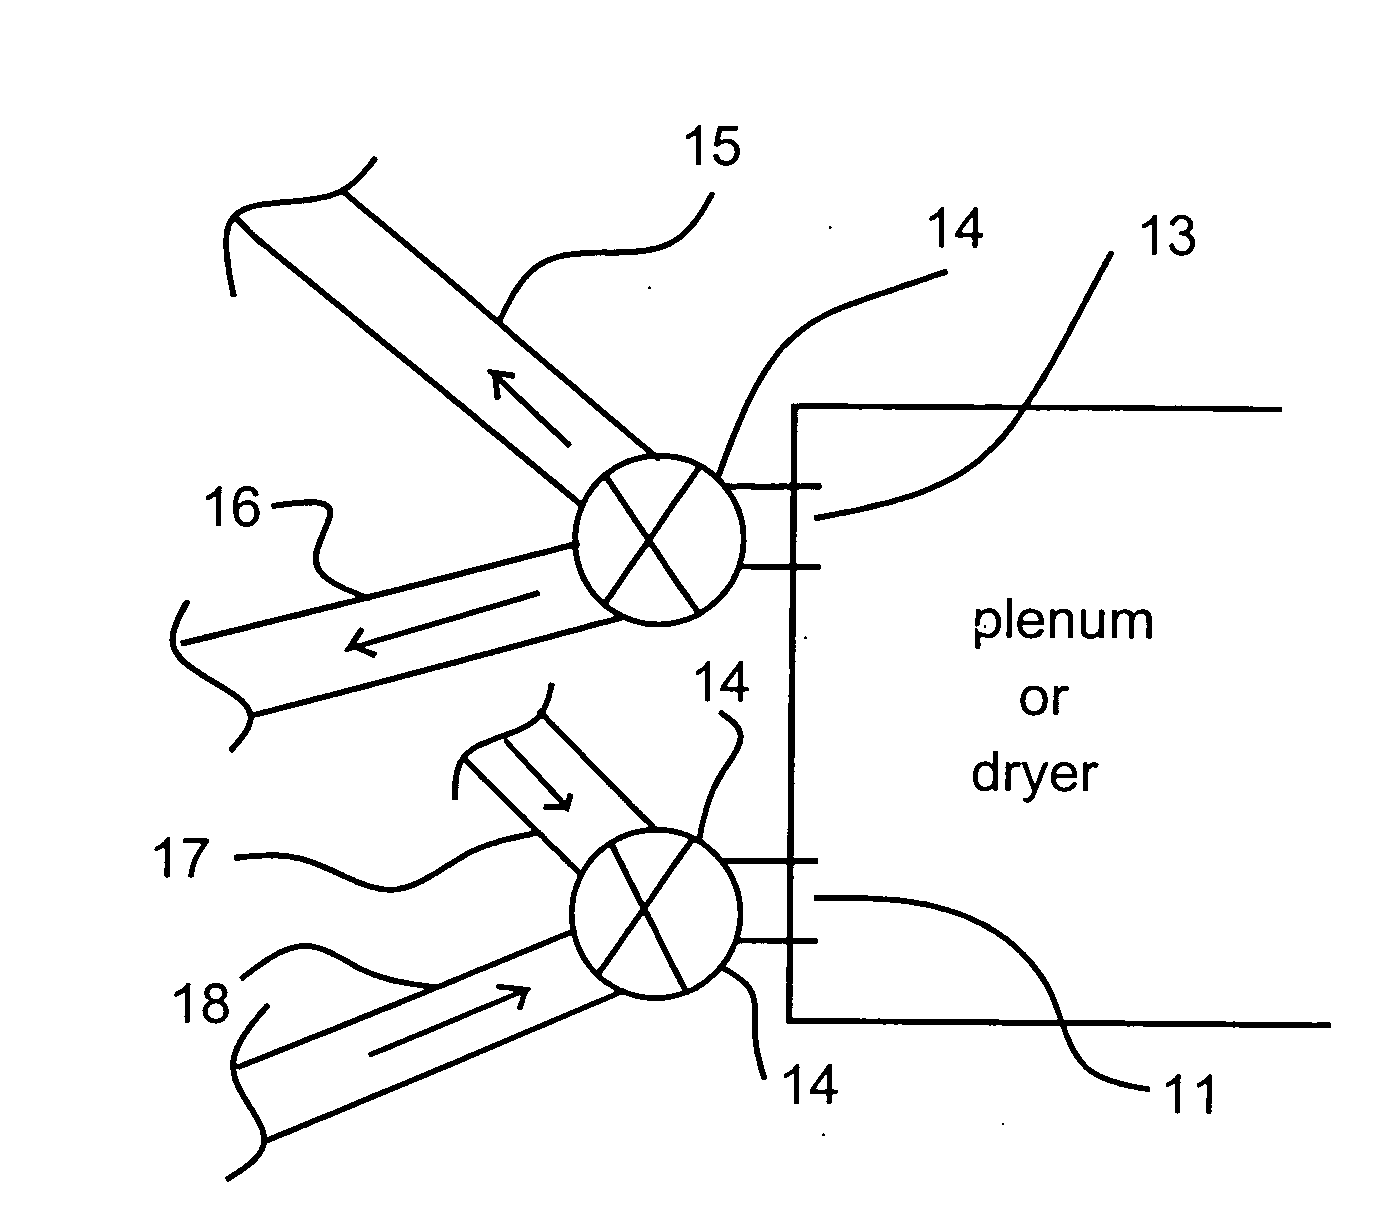 Apparatus and methods for improving the energy efficiency of dryer appliances